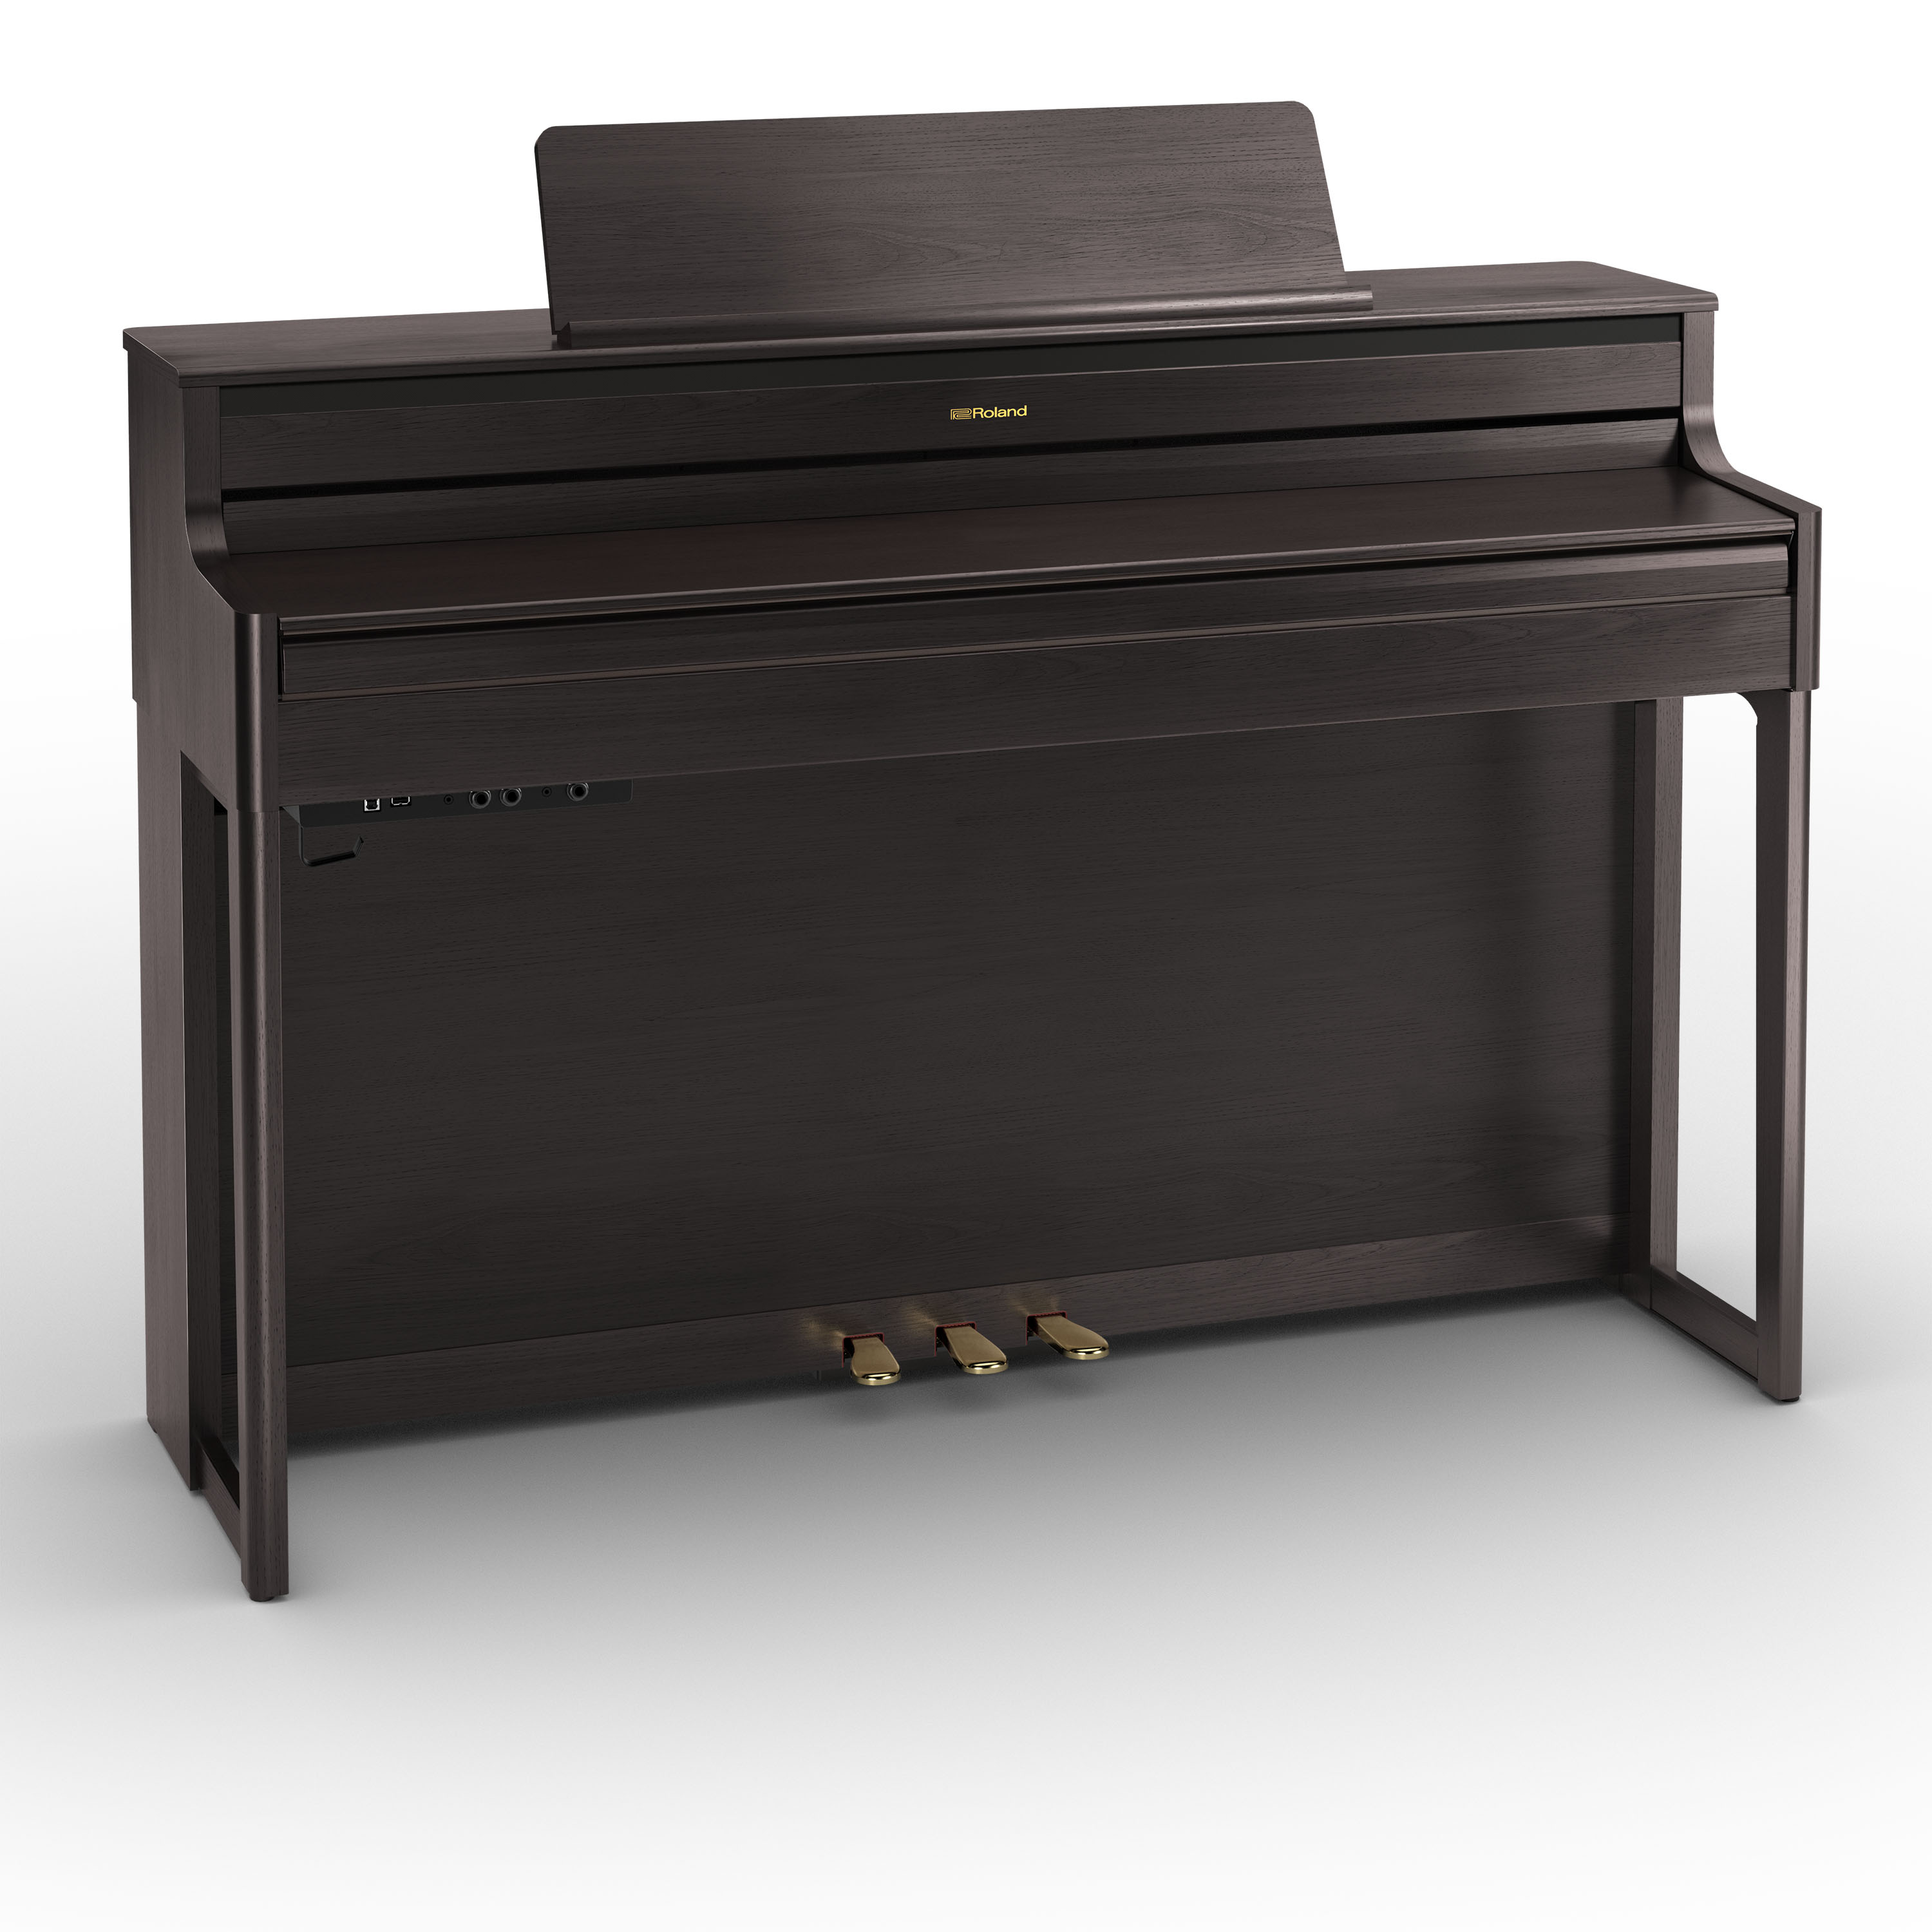 Roland Hp704 Dr Rosewood - Digital piano with stand - Variation 1